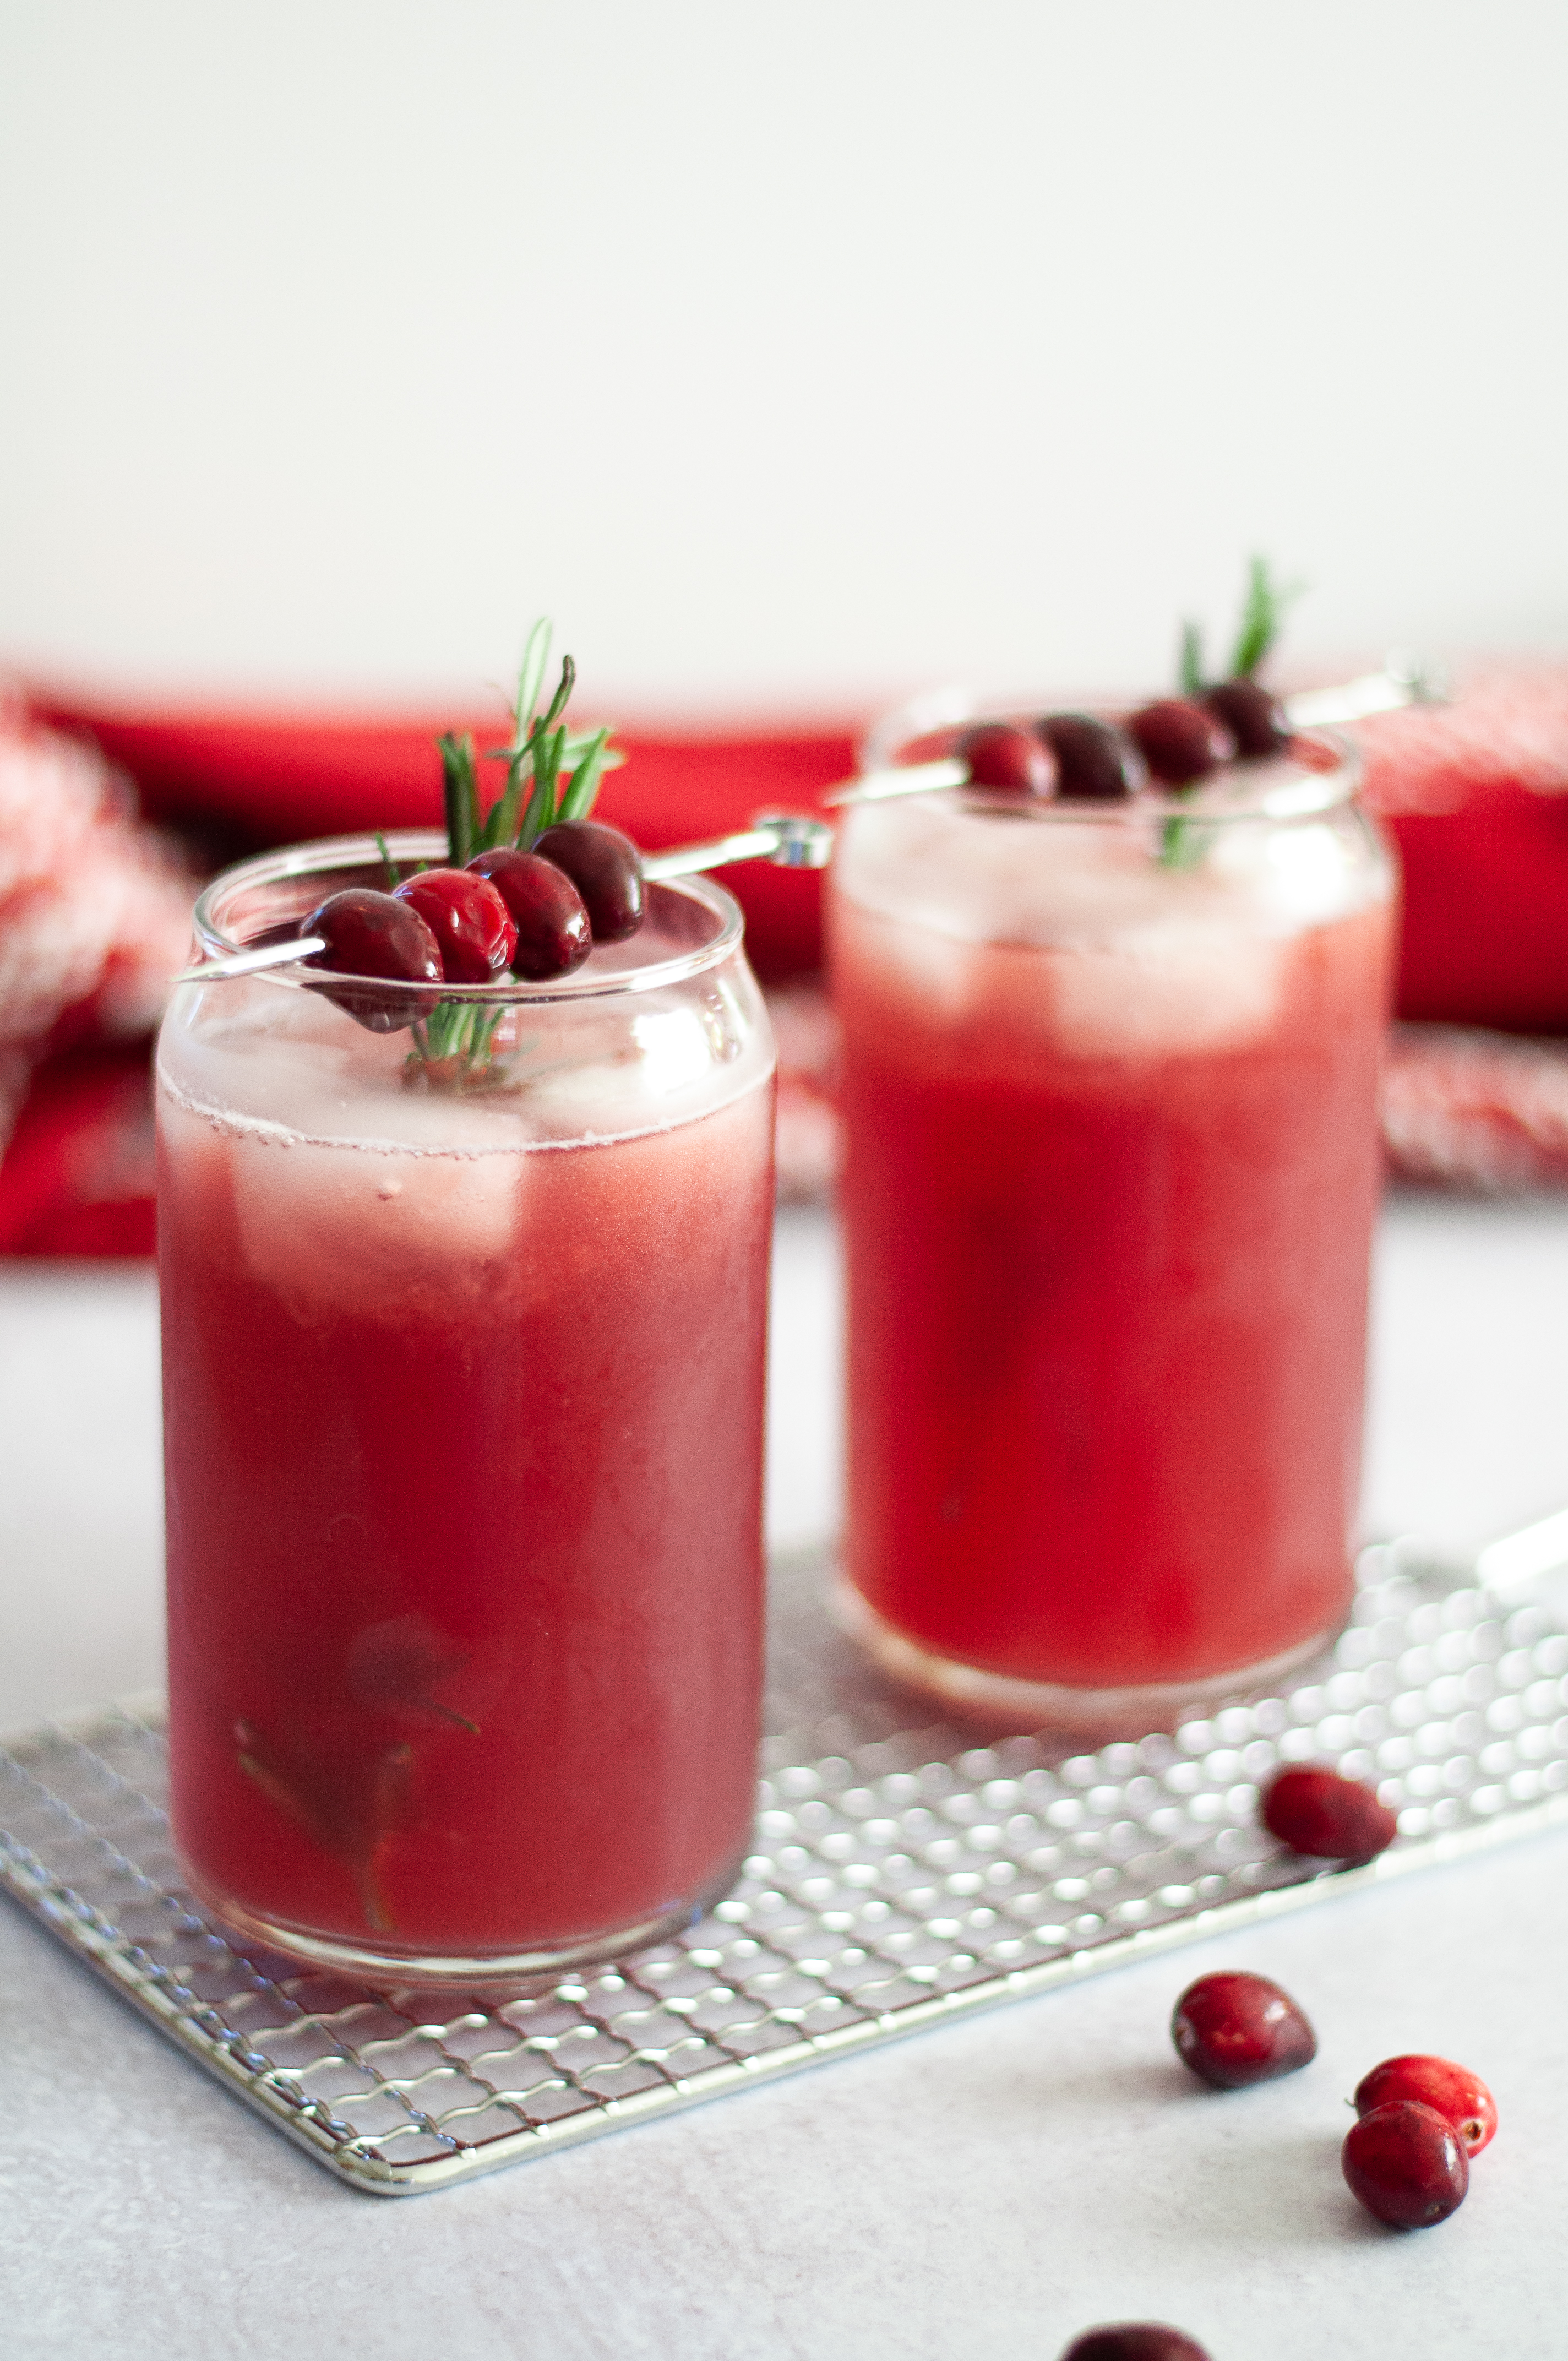 A different view of two glasses filled with this cranberry ginger mocktail, served on ice with a sprig of rosemary and a cocktail pick of cranberries